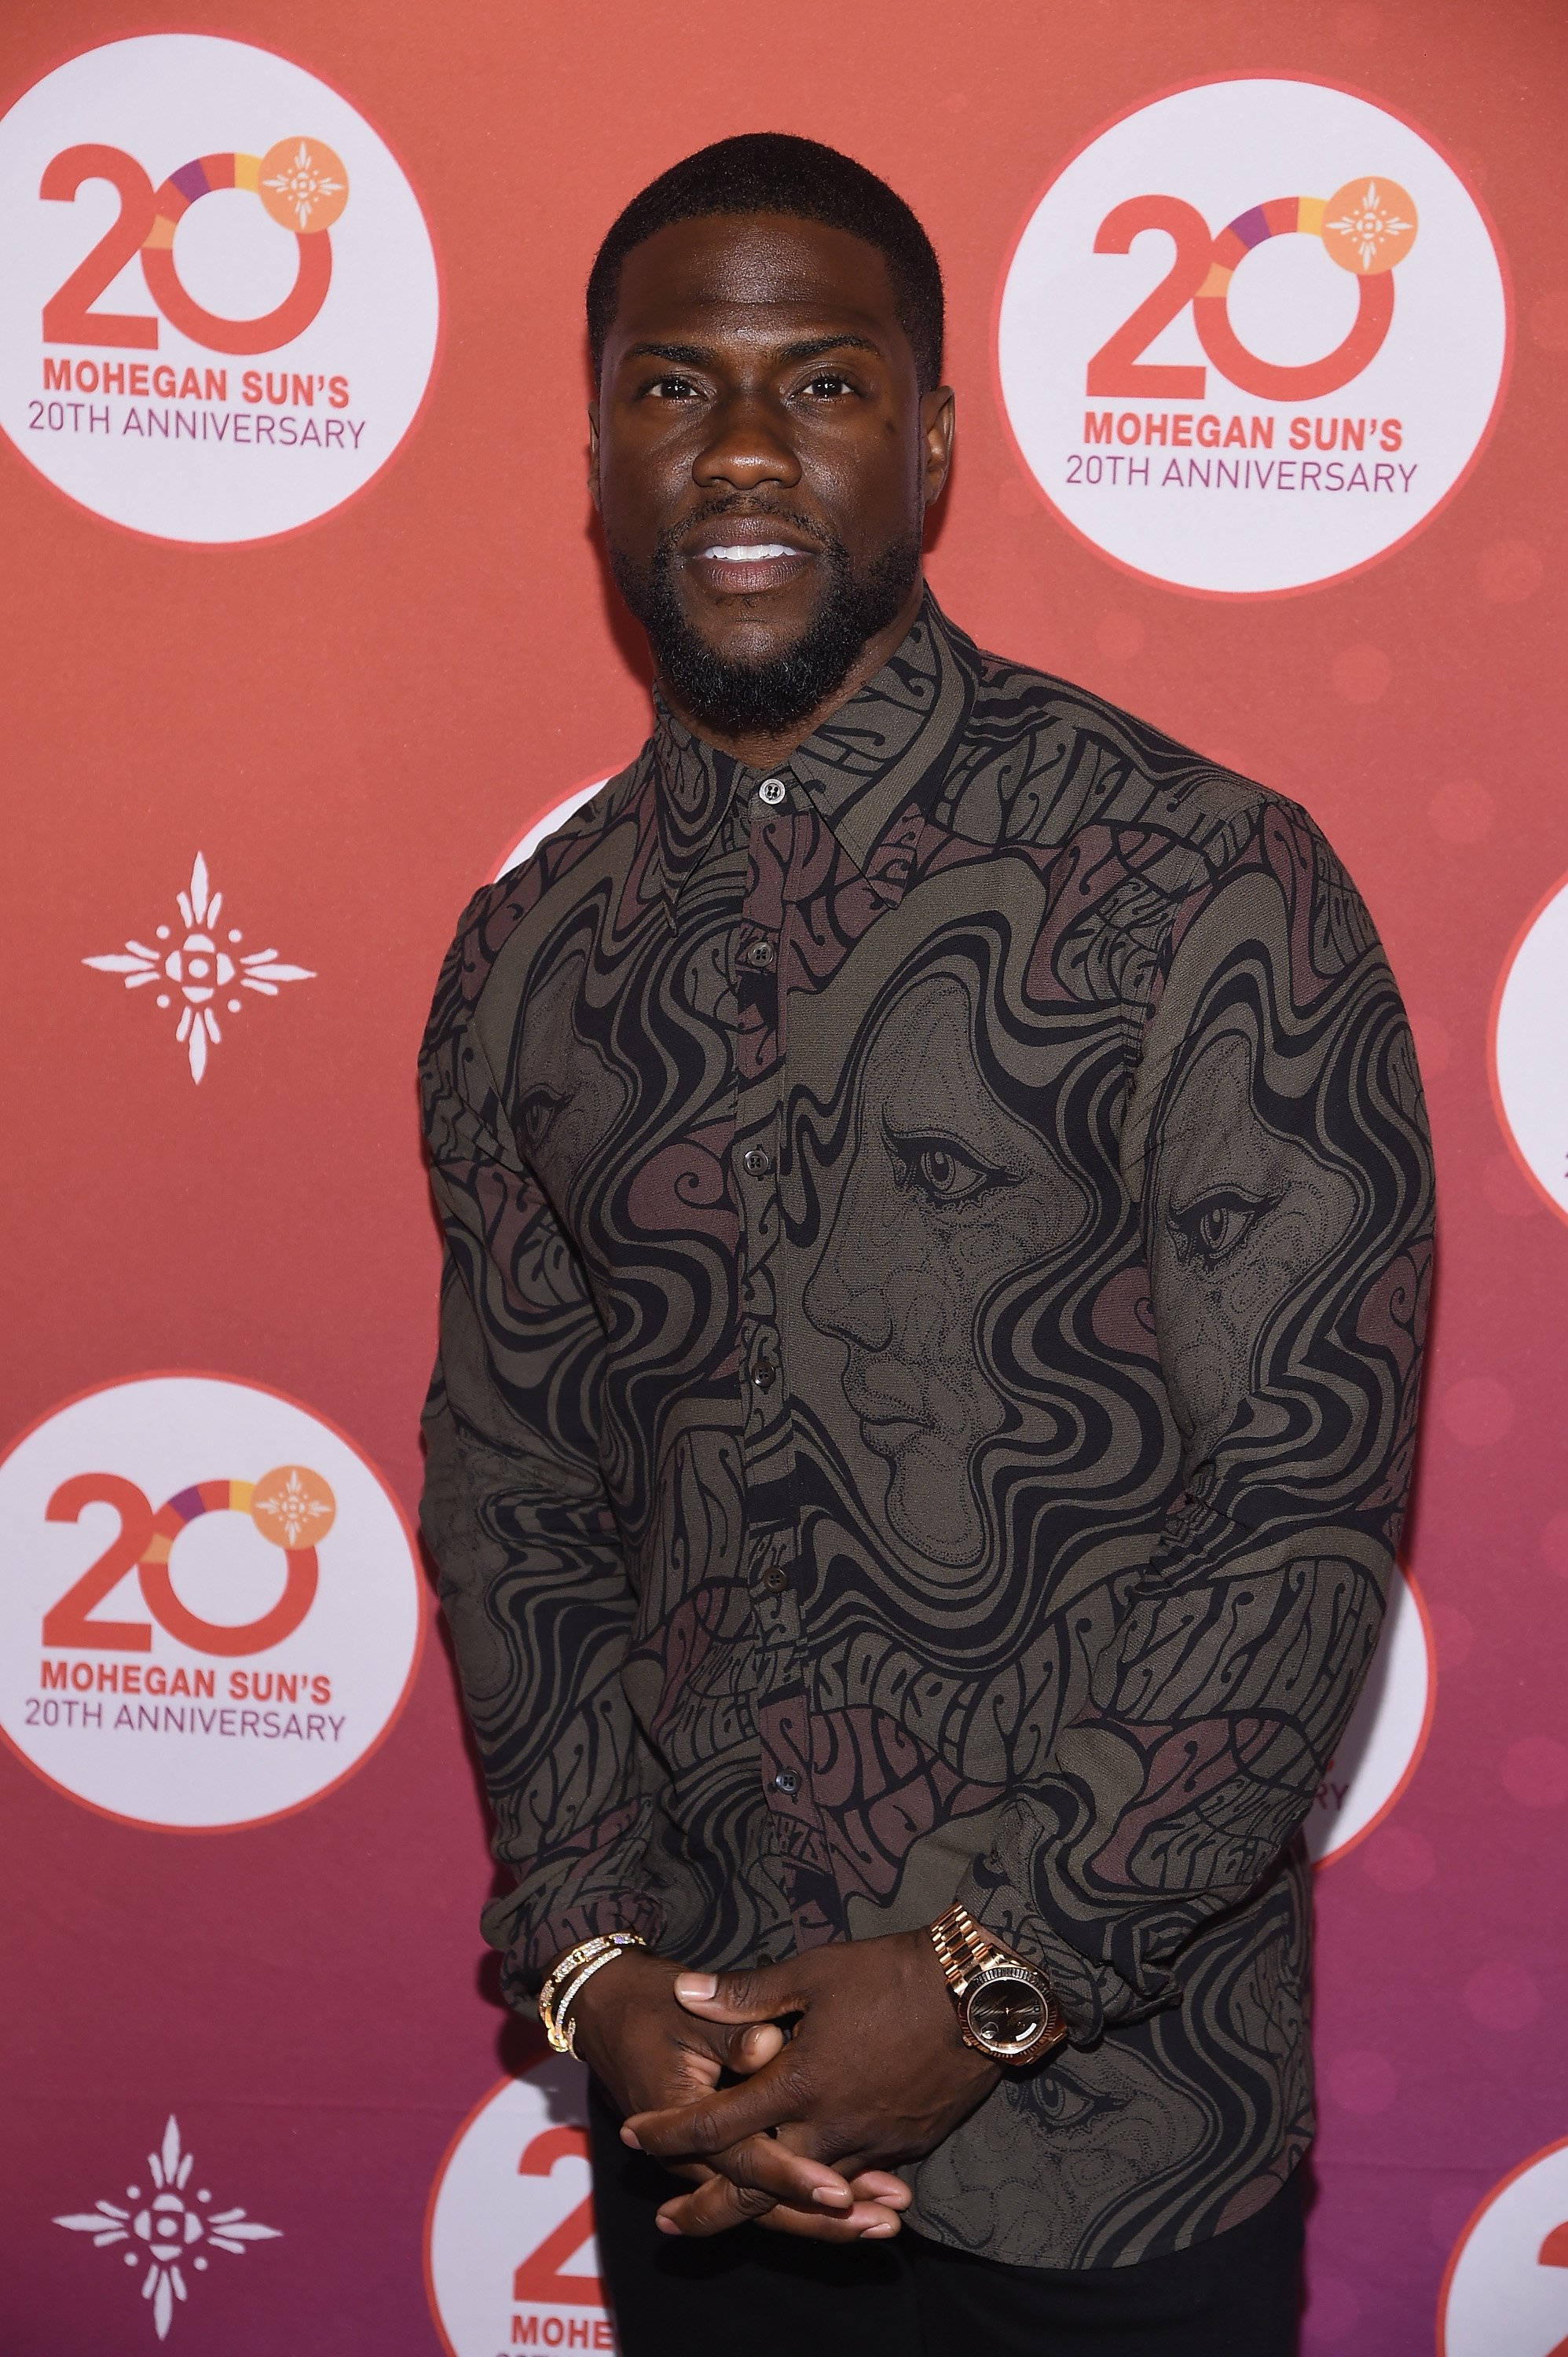 Kevin Hart walks the red carpet before the Kevin Hart Official After Party with DJ Ruckus for Mohegan Suns 20th Anniversary on October 14, 2016, in Uncasville, Connecticut. | Source: Getty Images.